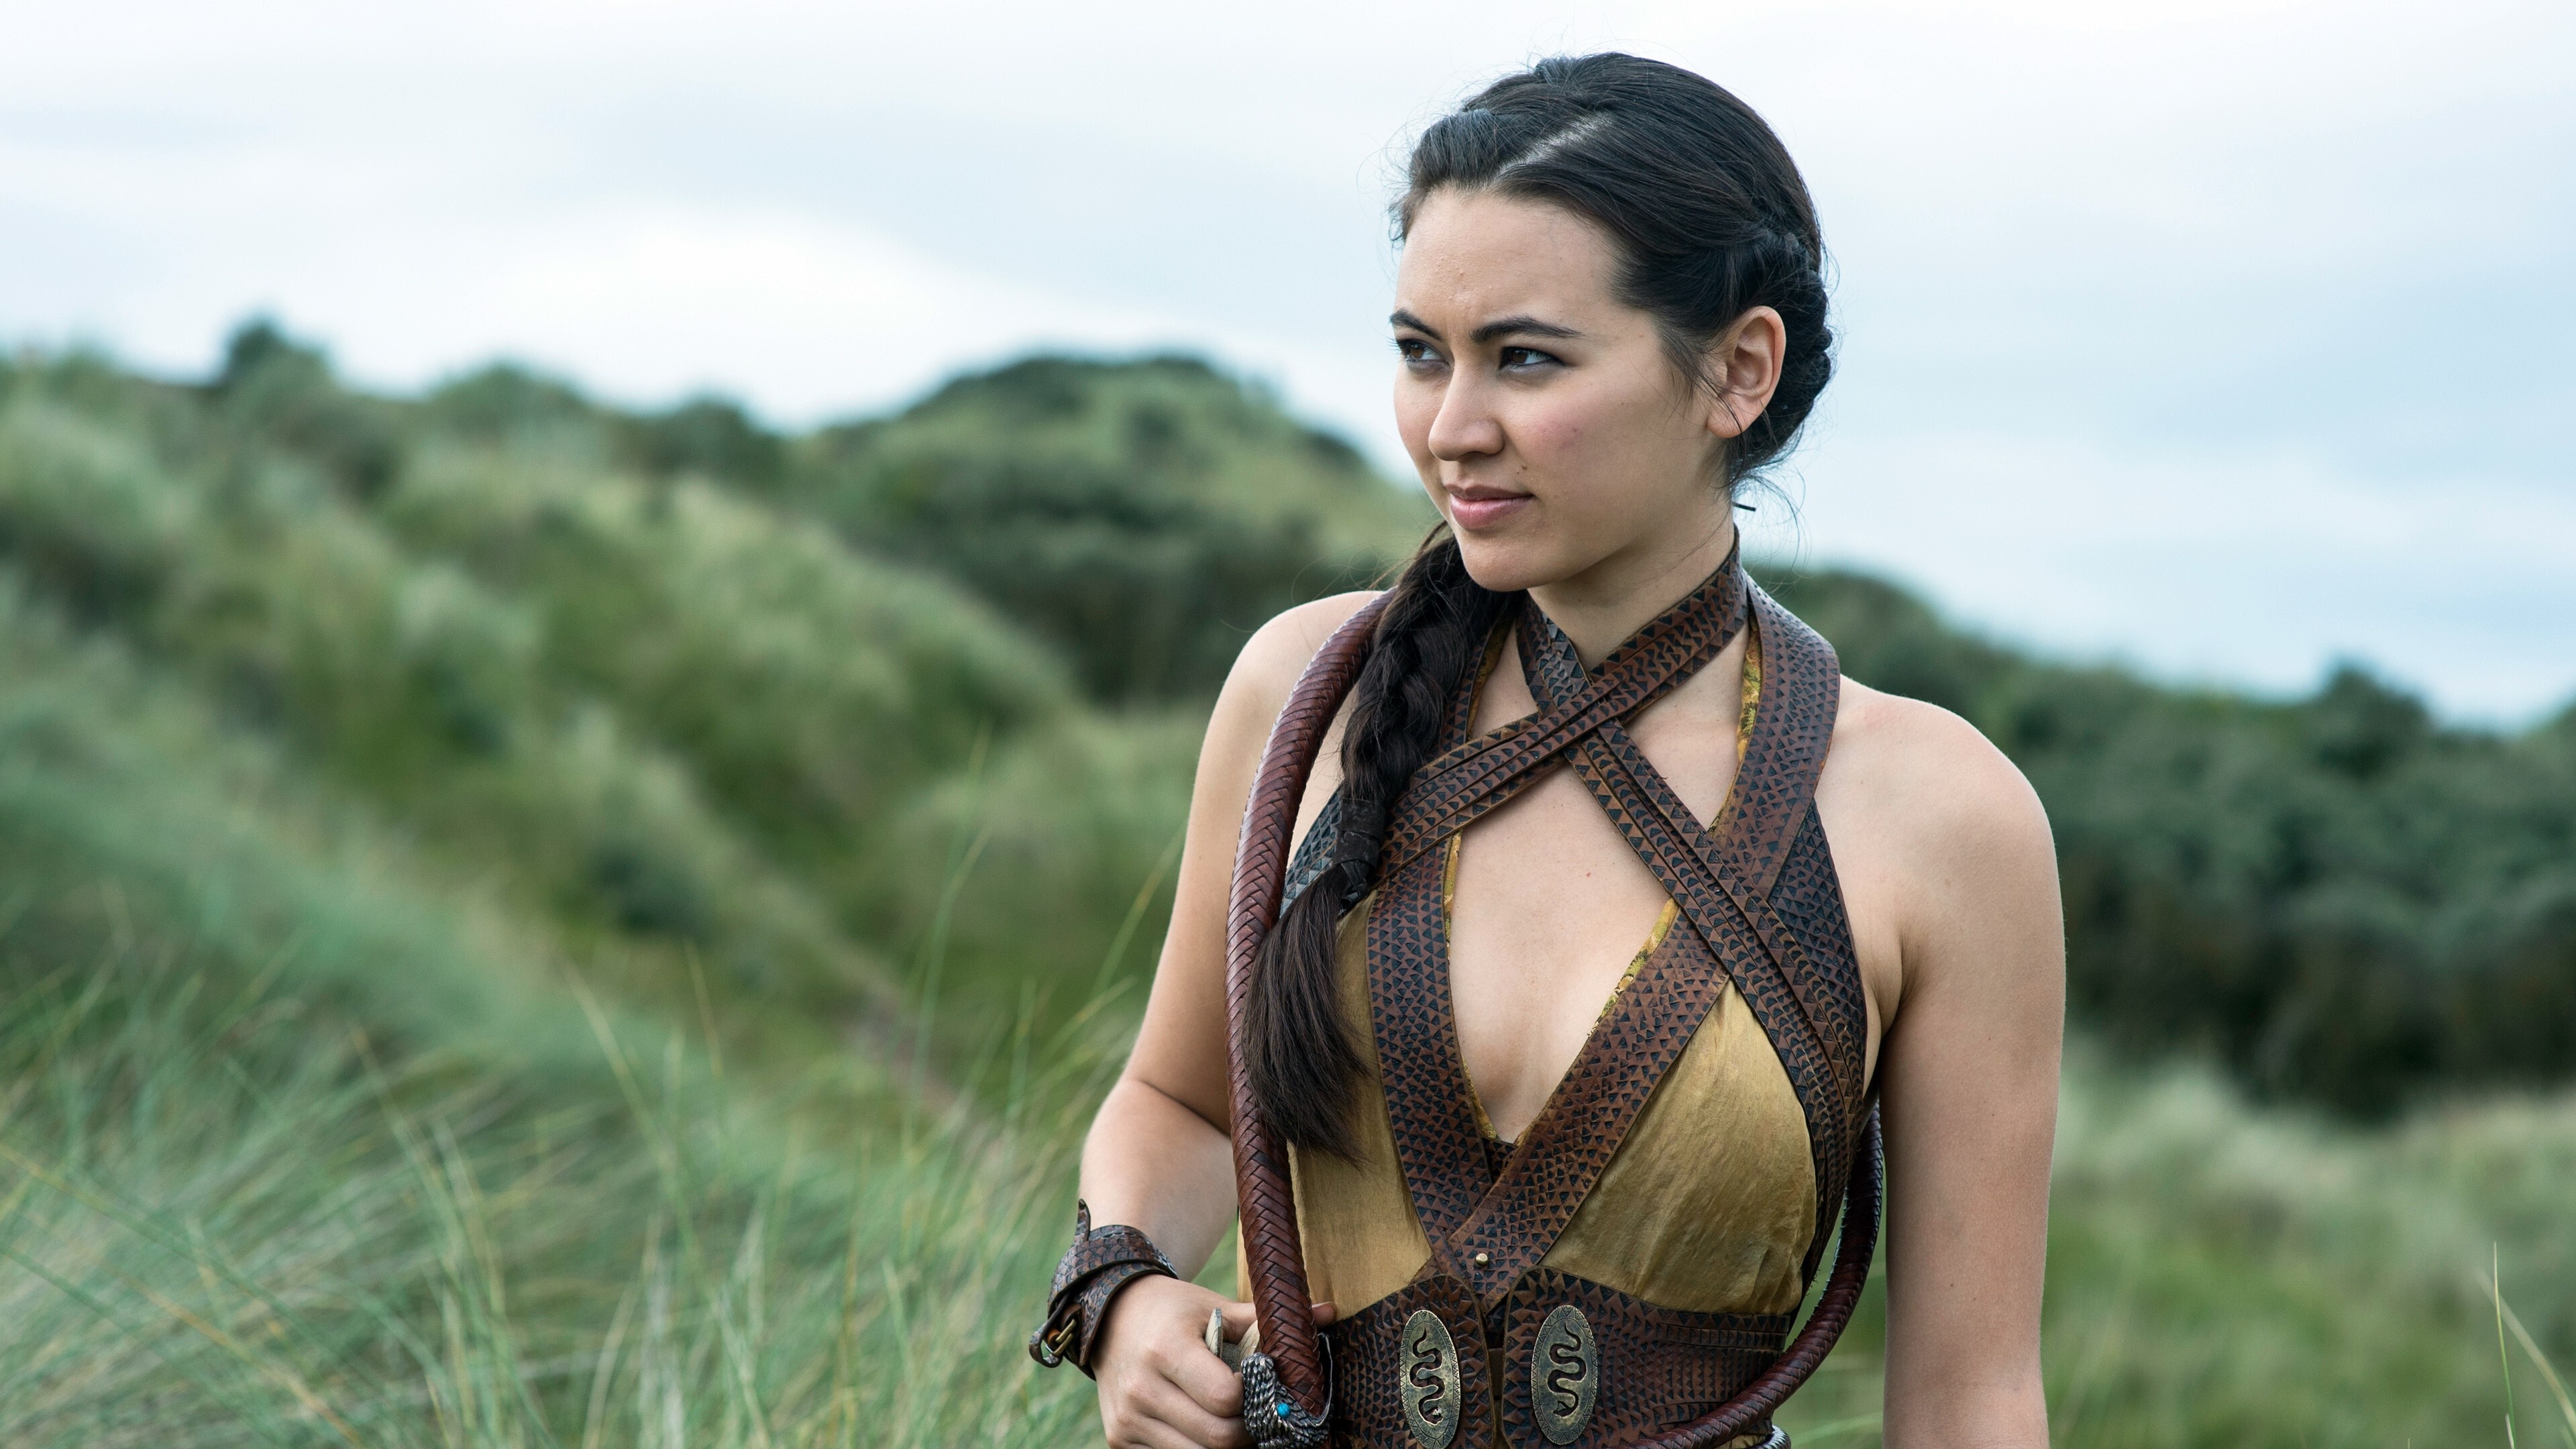 Jessica Henwick: An actress who joined the cast of the HBO series Game of Thrones in Season 5 as Nymeria Sand. 3840x2160 4K Background.